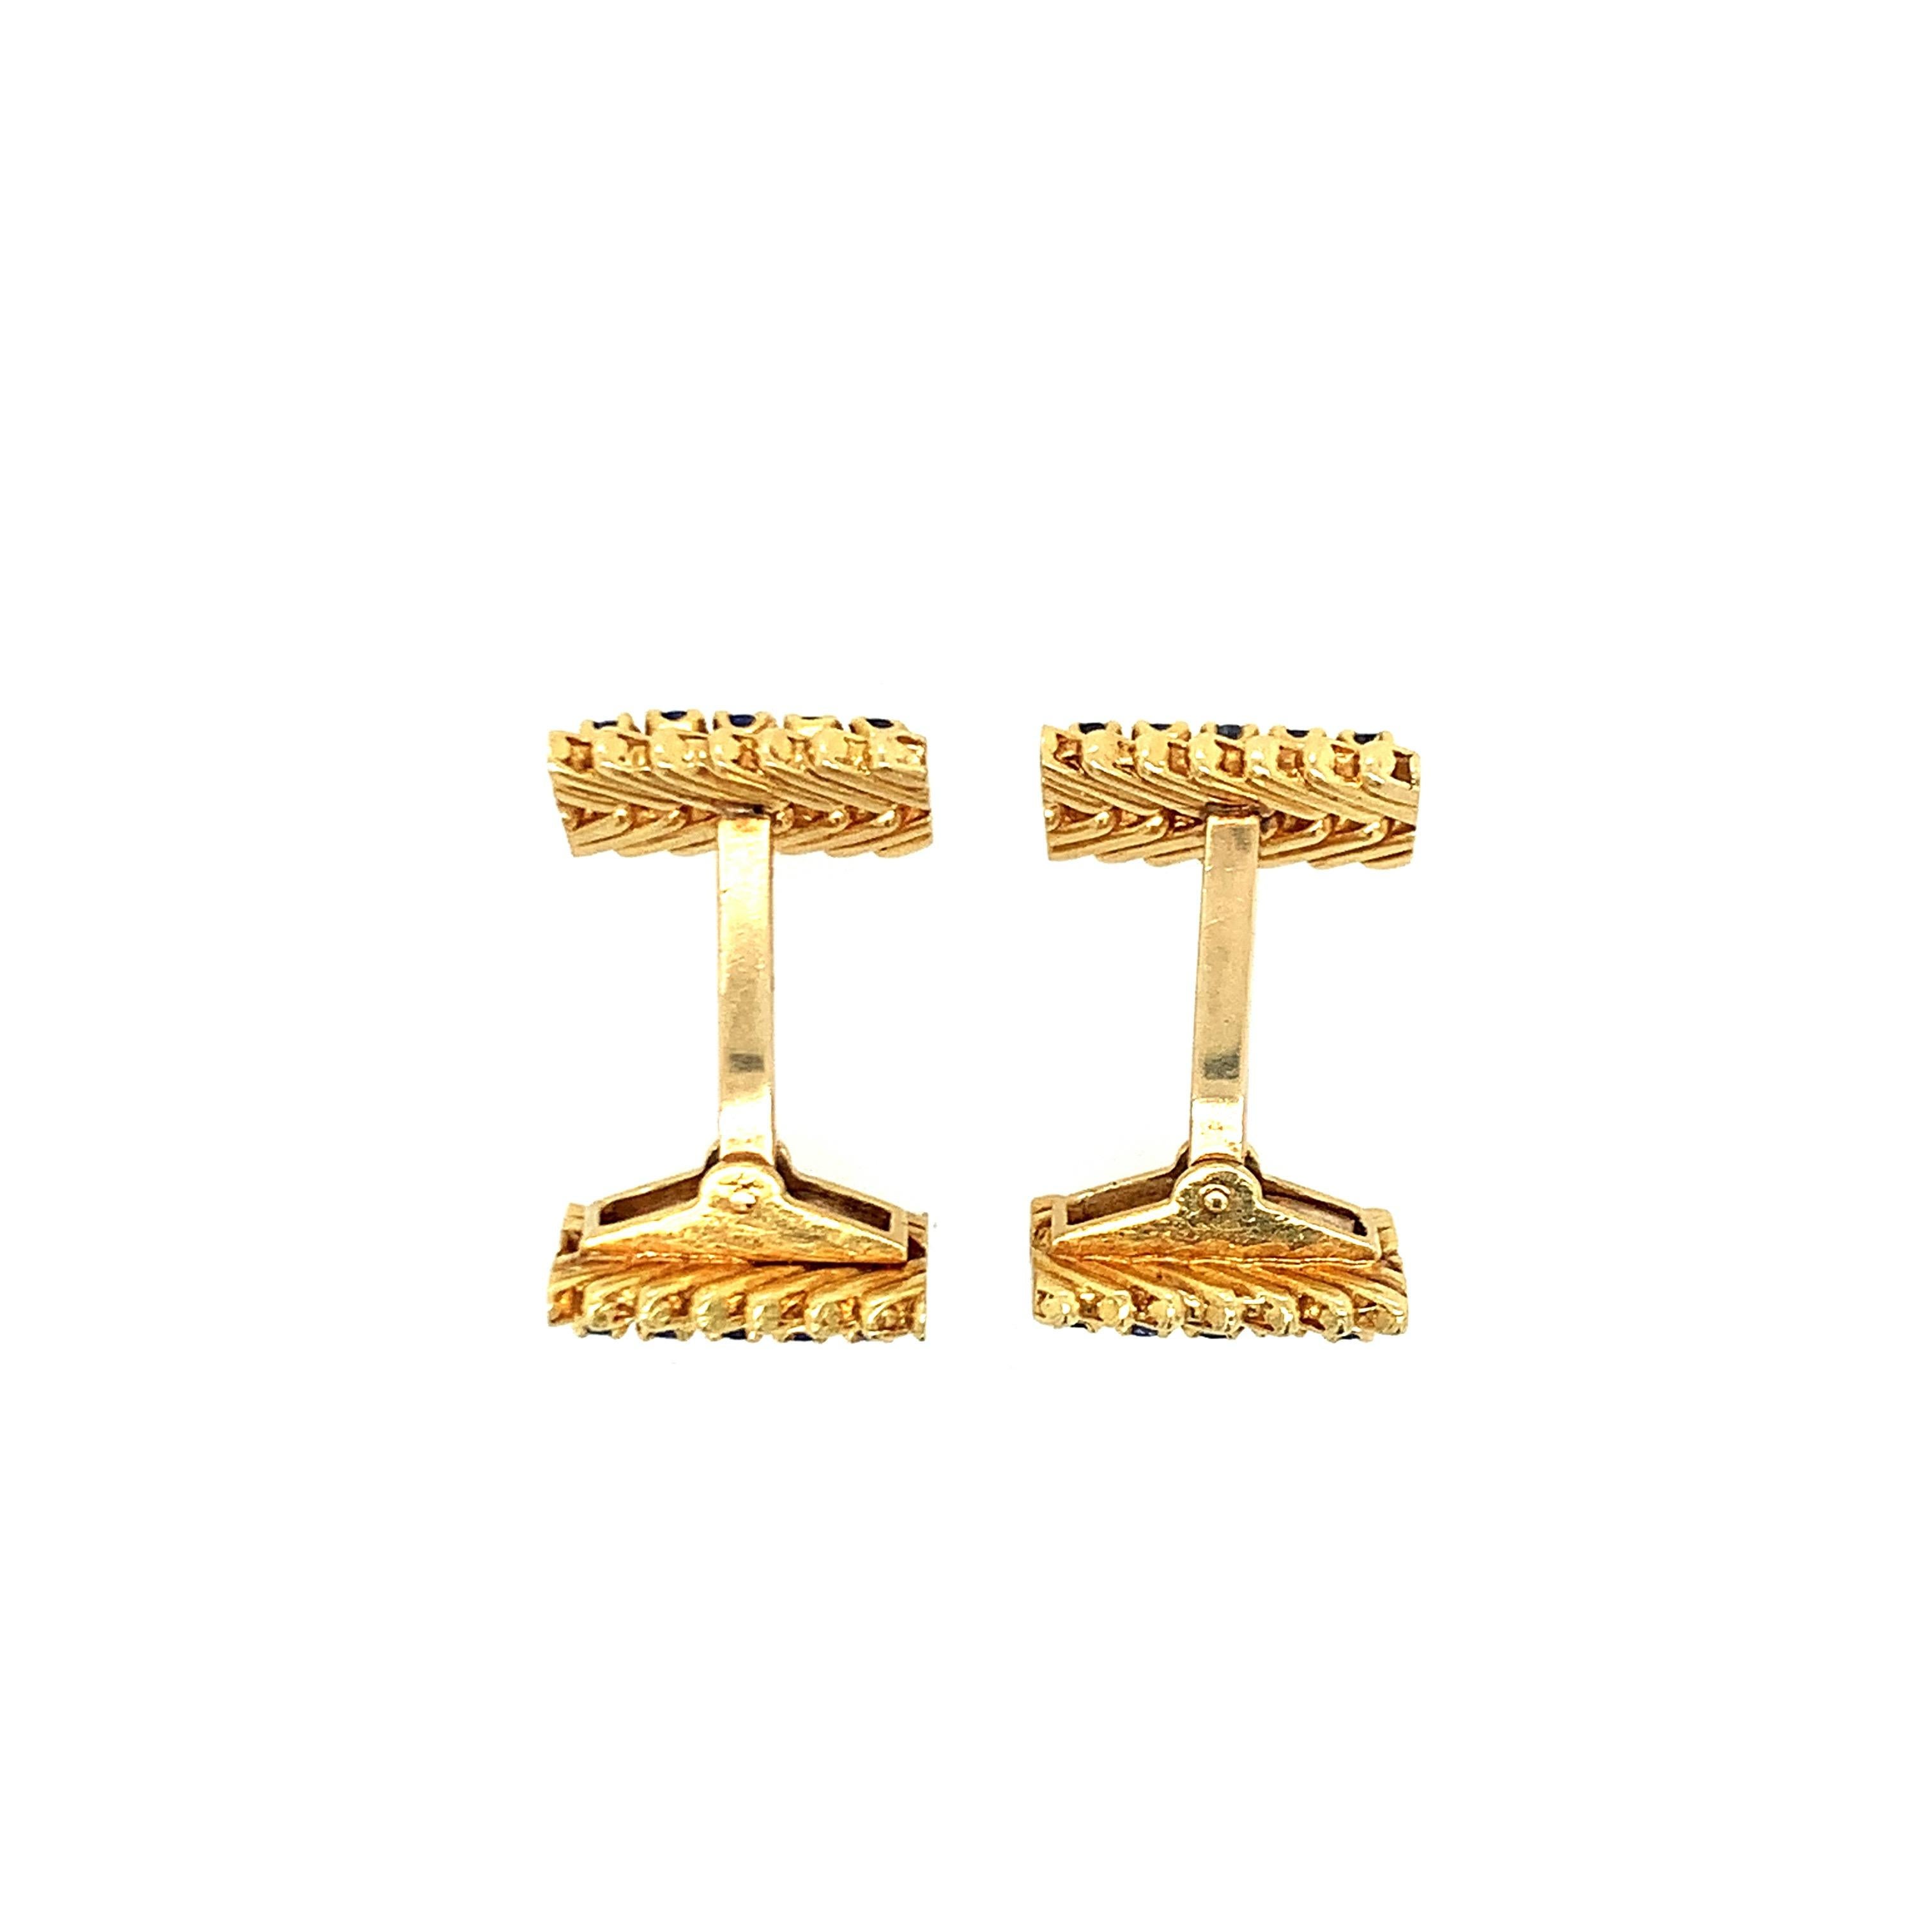 Van Cleef & Arpels Gold Sapphire Cufflinks In Excellent Condition For Sale In New York, NY